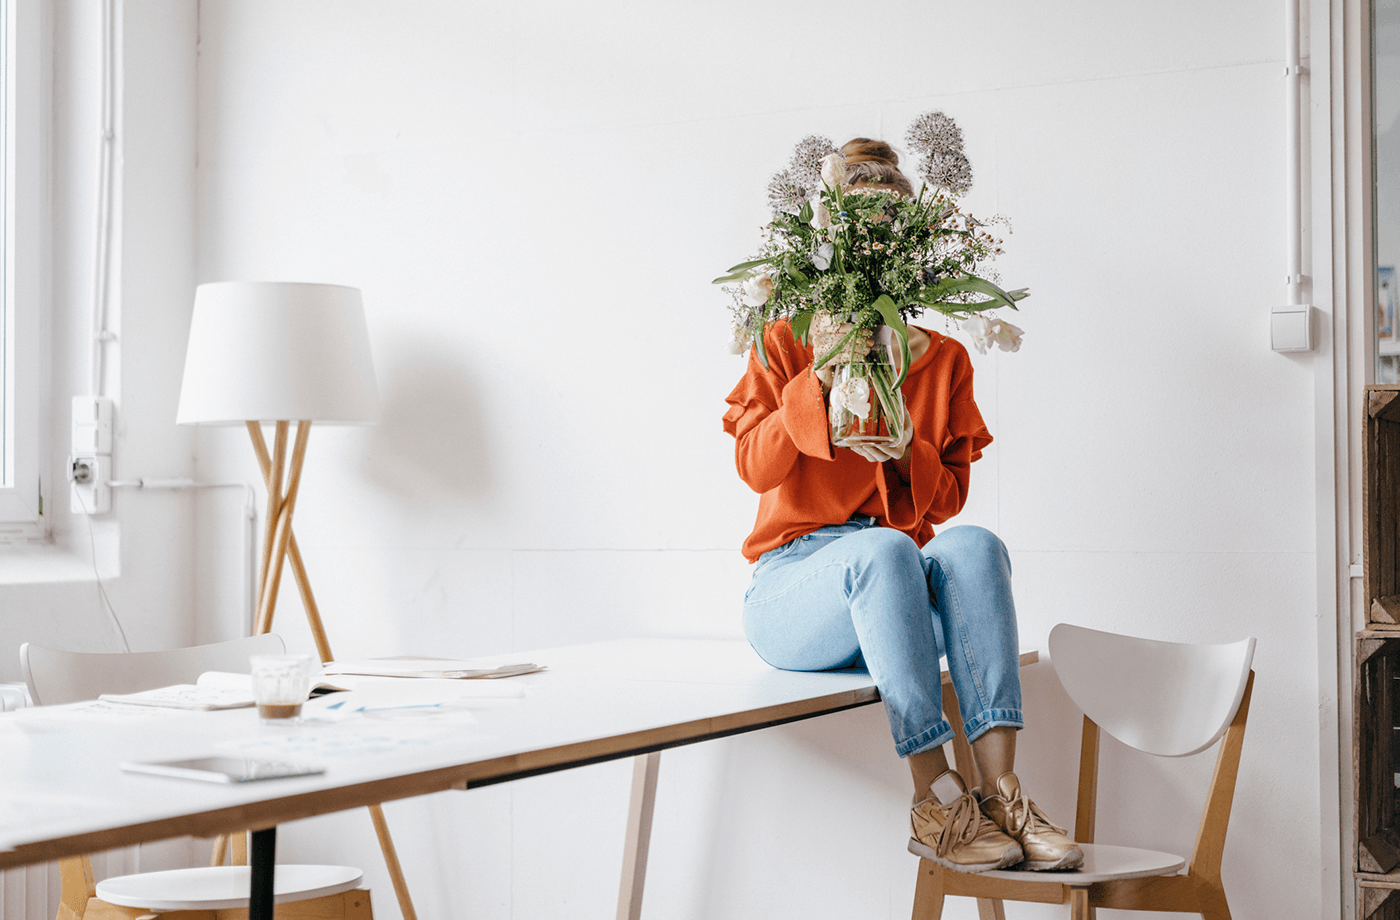 THIS IS THE GENIUS TRICK TO MAKING FRESH FLOWERS LAST LONGER THAT YOU’RE MISSING